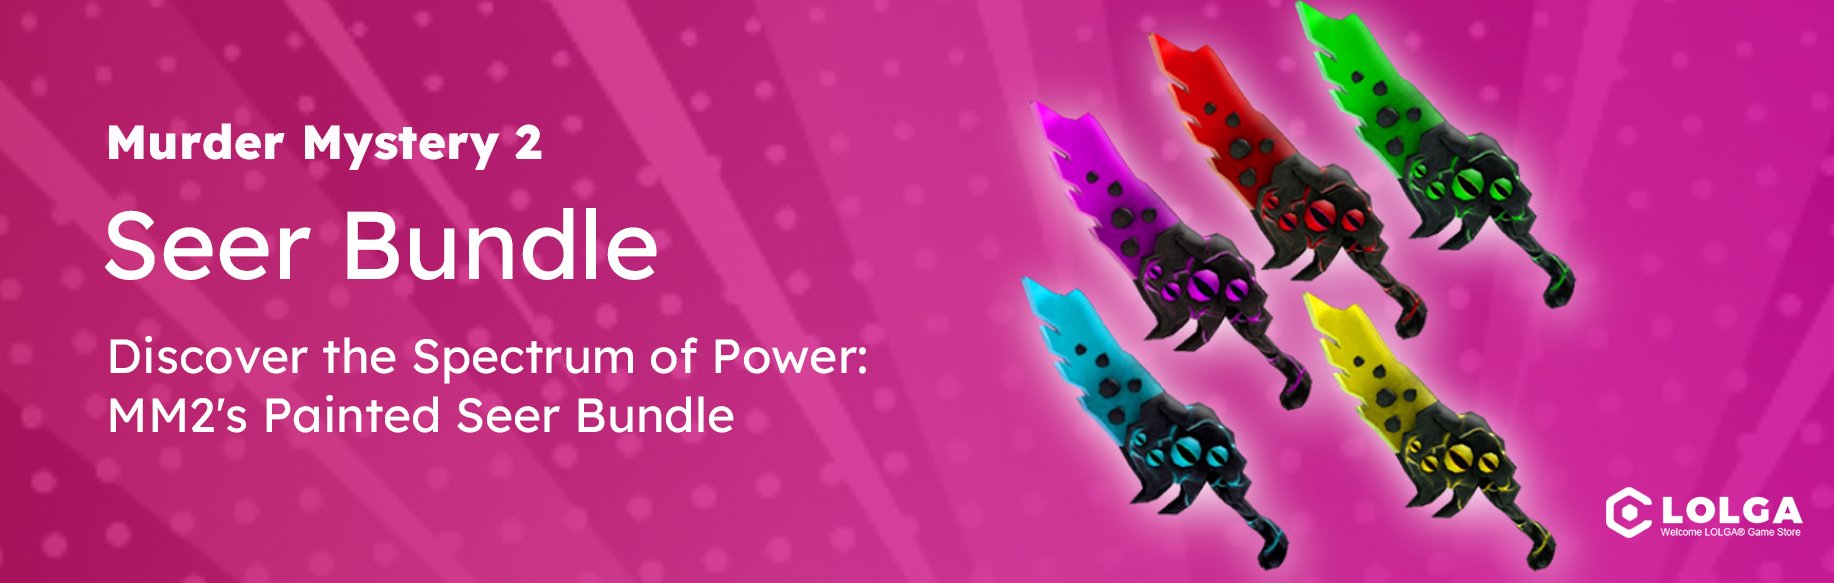 Discover the Spectrum of Power: MM2's Painted Seer Bundle